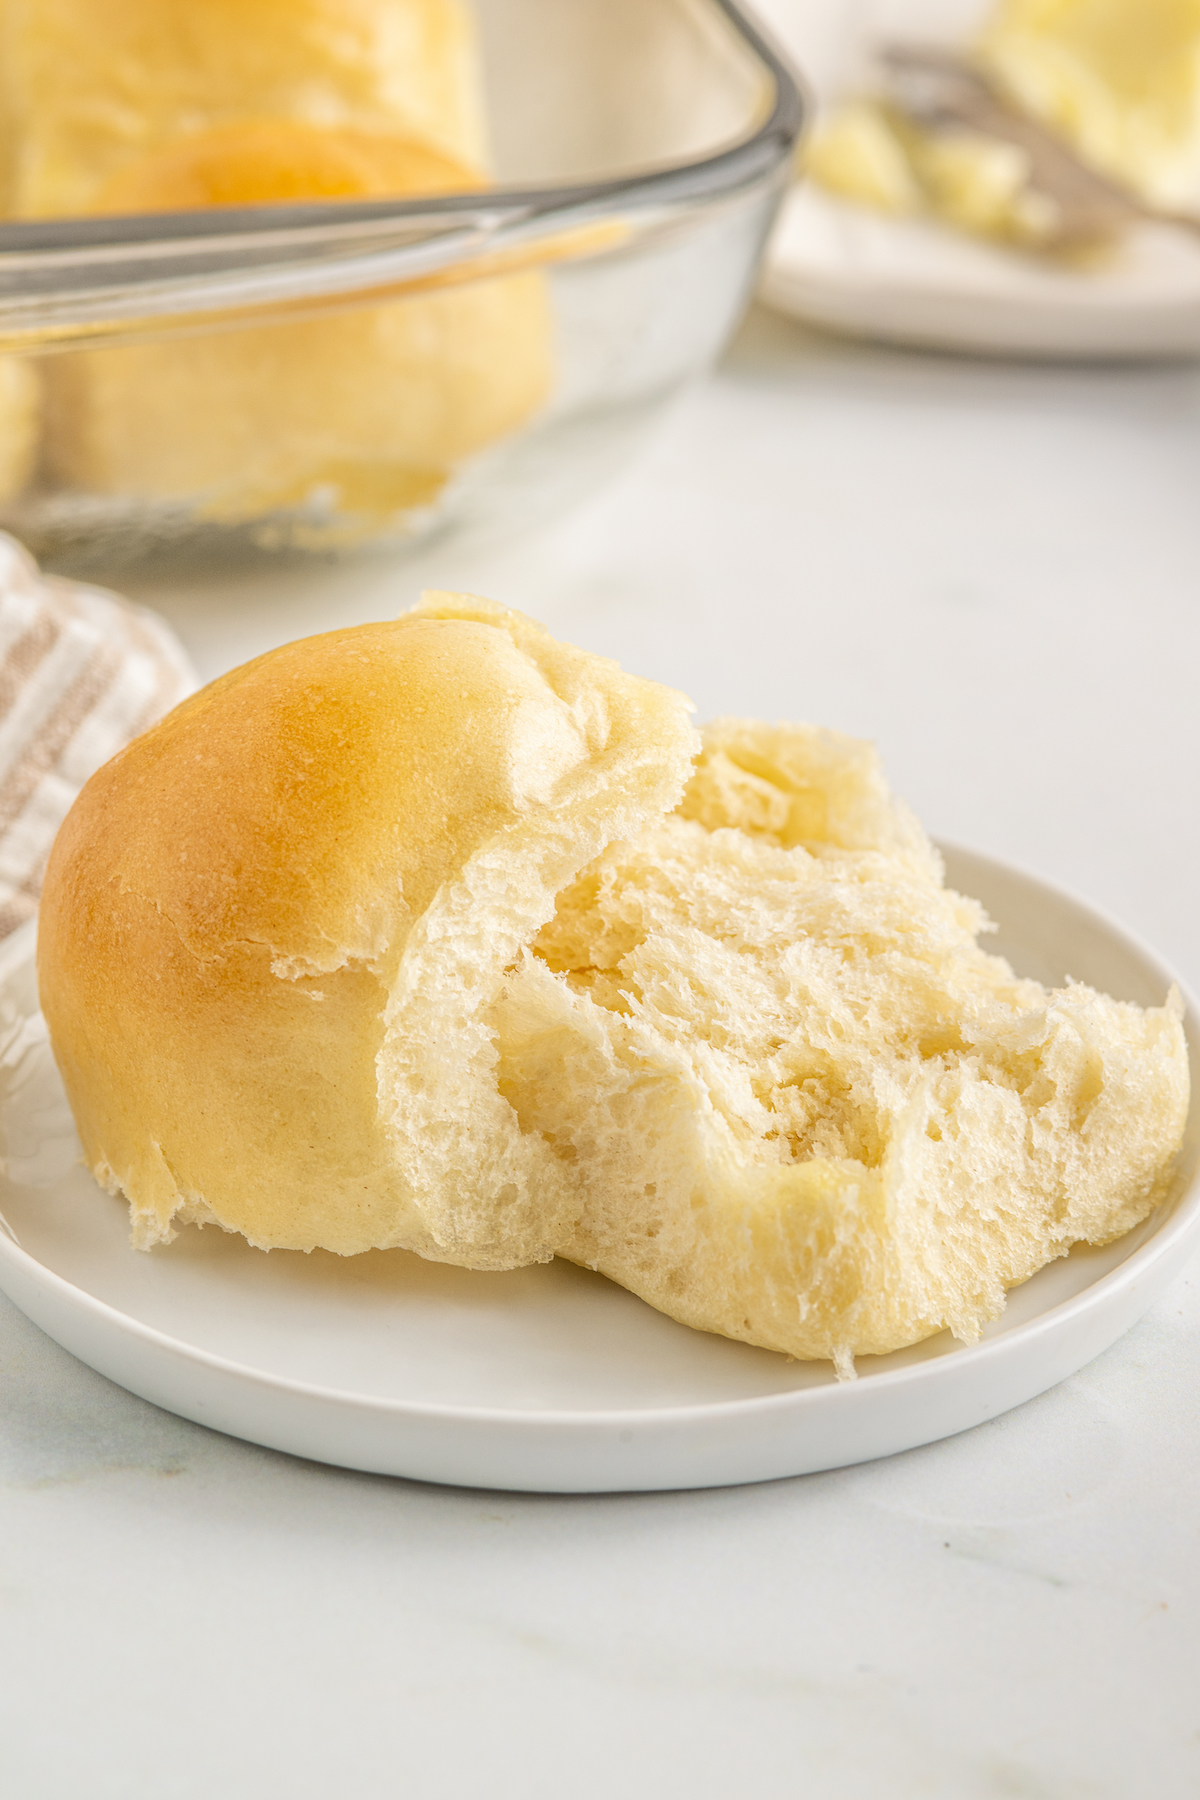 A dinner roll sliced in half to show the texture.